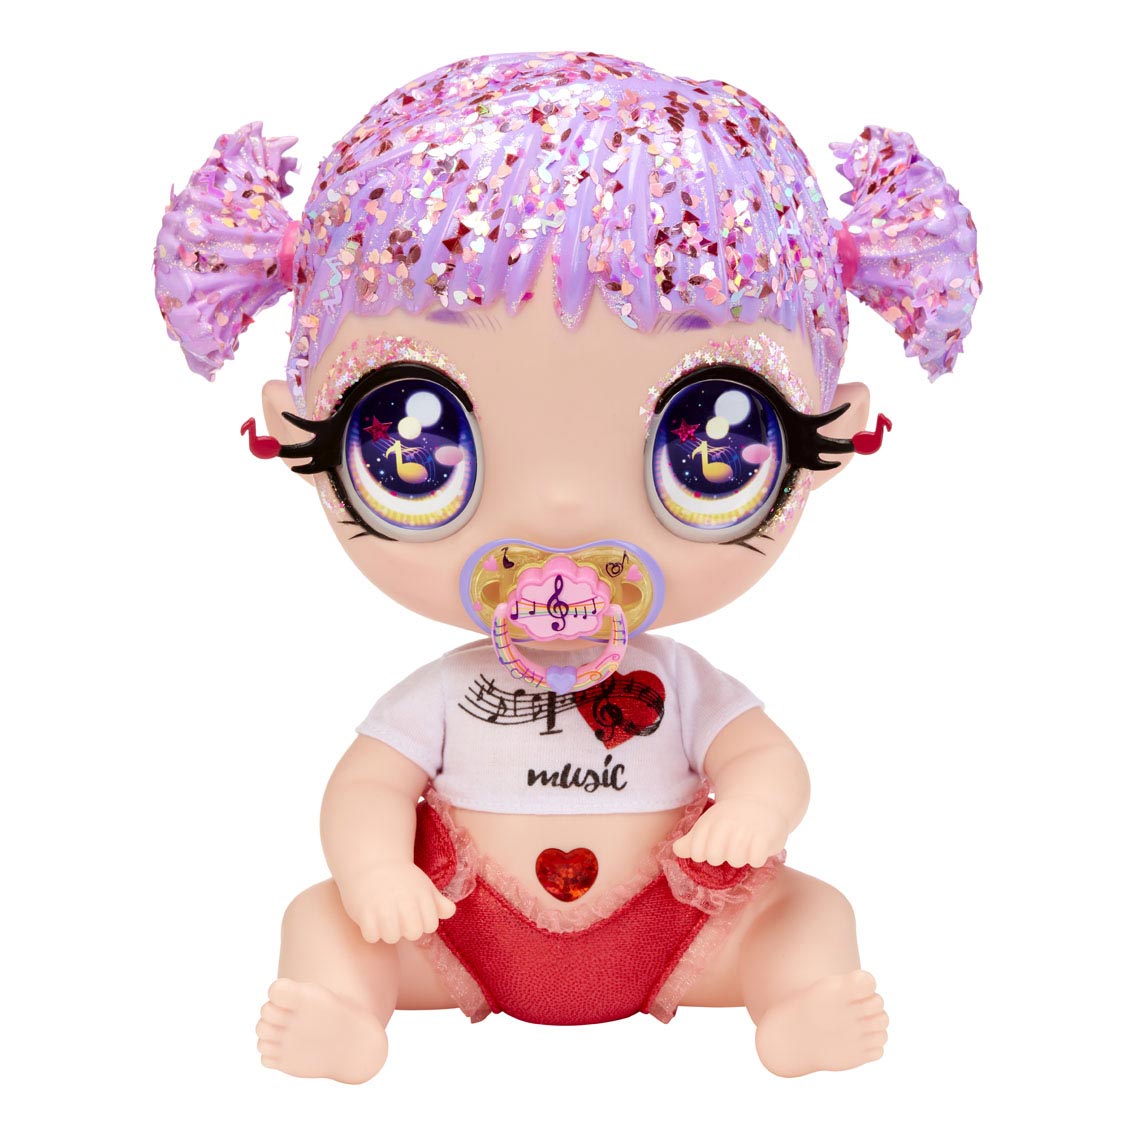 GLITTER BABYZ Dreamia Stardust Baby Doll with 3 magical color changes/ pink  hair doll with rainbow outfit and reusable diaper, bottle and pacifier